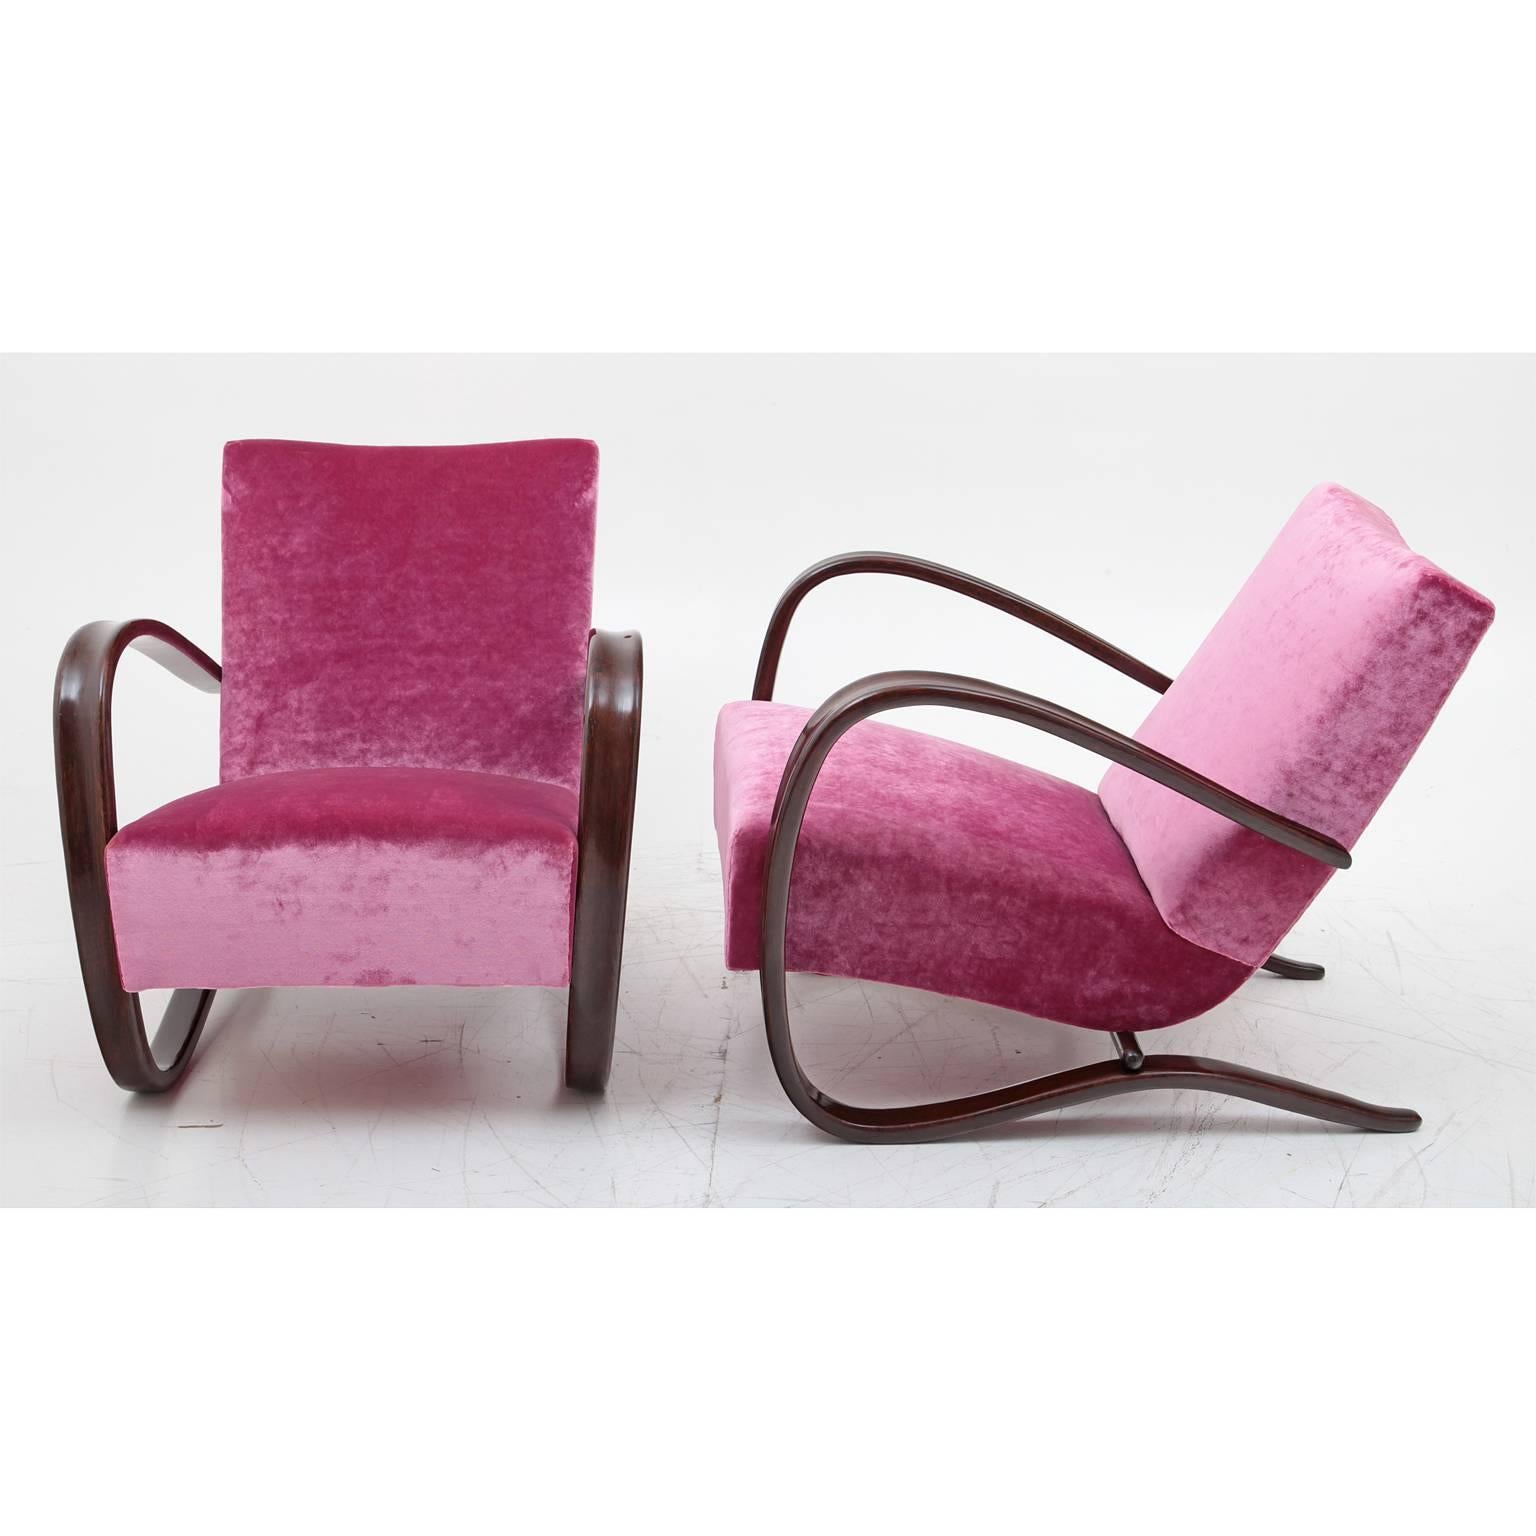 Iconic pair of chairs from the famous Czech designer Jindrich Halabala. The dark-stained armrests flow in an elegant c-shape around the side of the seating surface and become the frame of the chair. The chairs have been reupholstered.